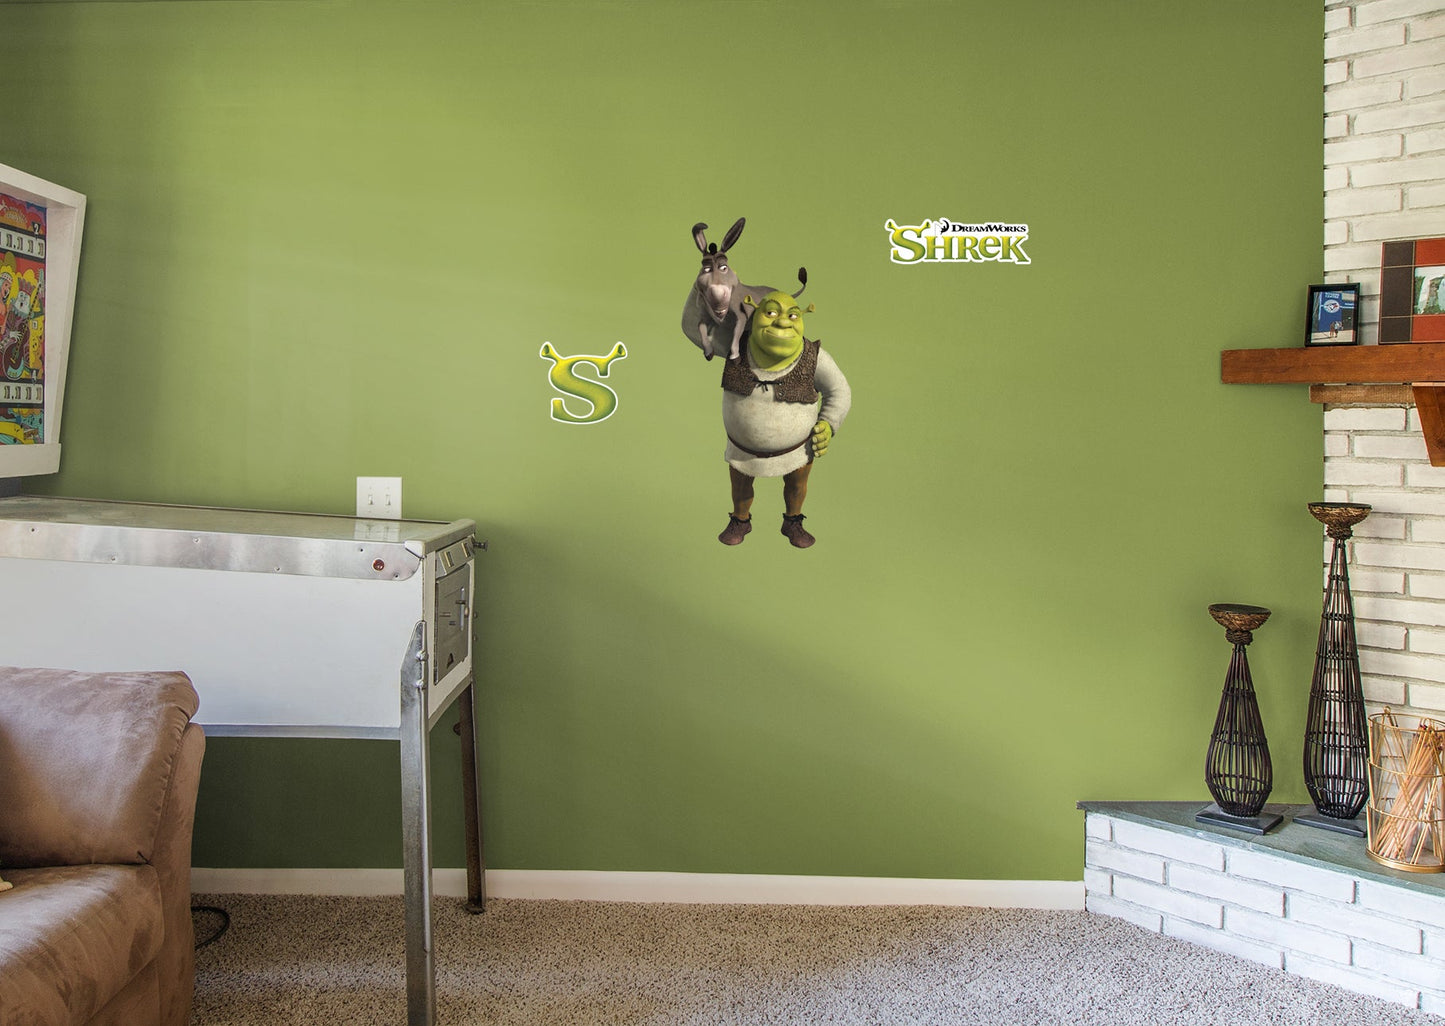 Shrek: Shrek and Donkey RealBig - Officially Licensed NBC Universal Removable Adhesive Decal